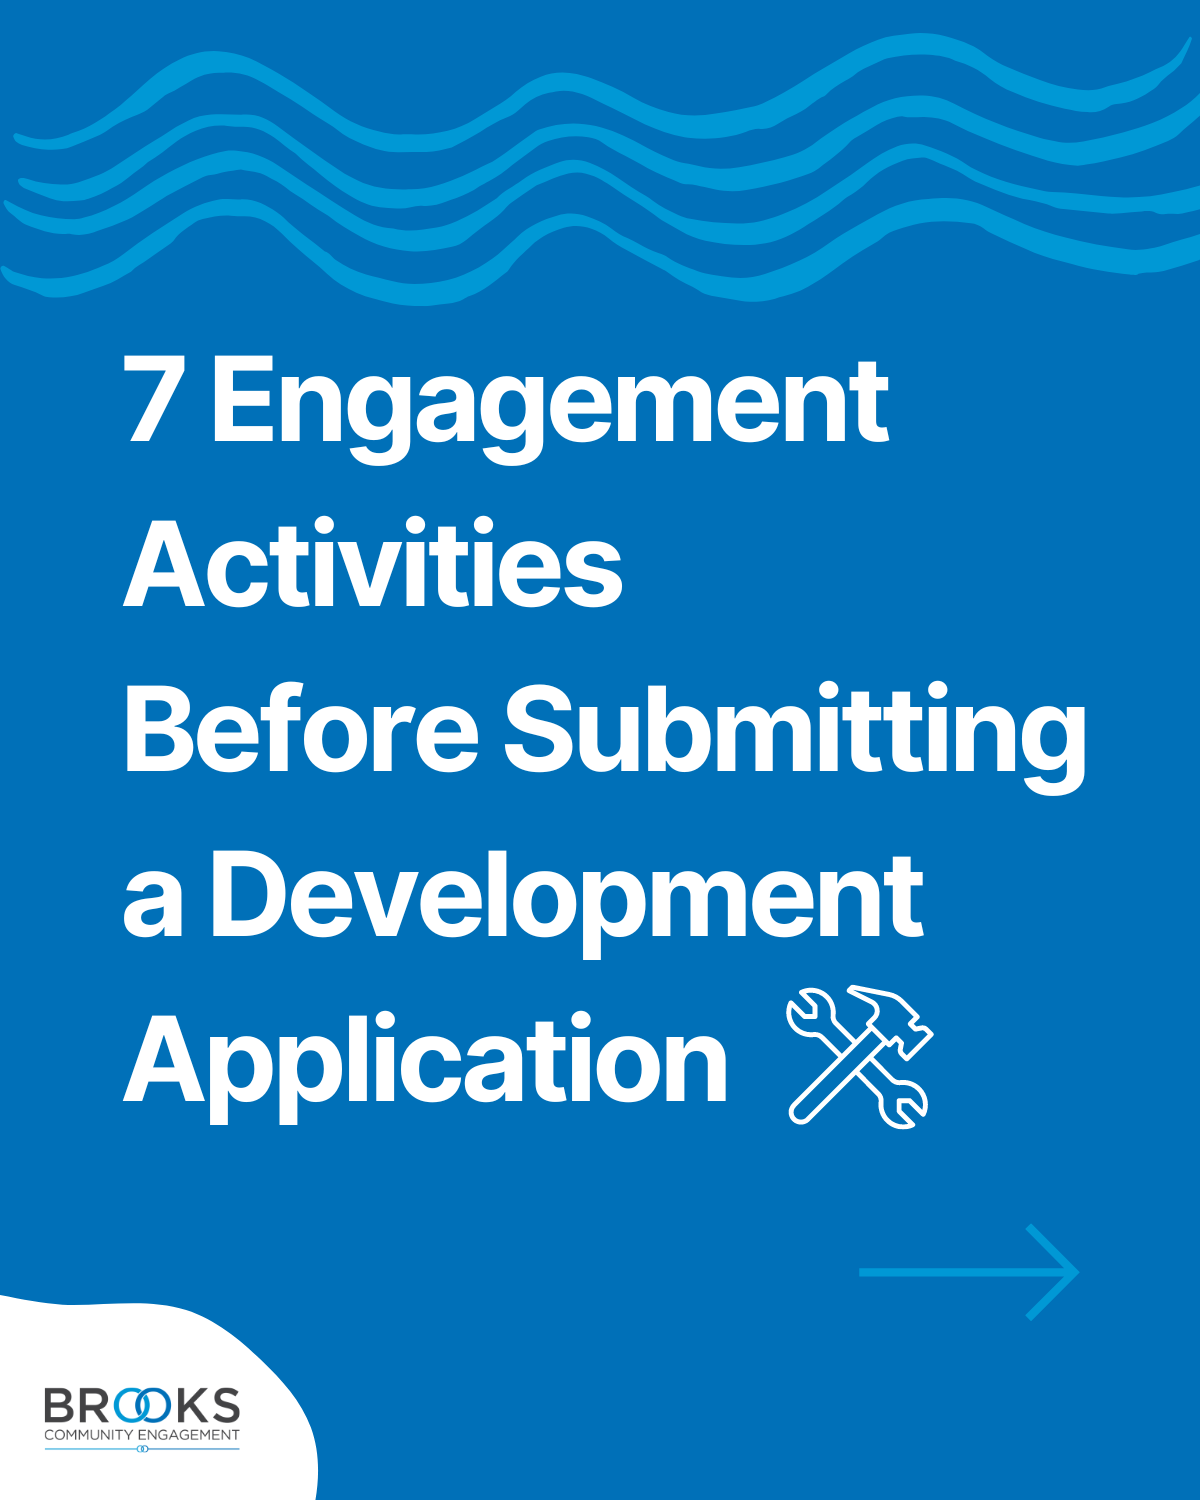 7 Engagement Activities Before Submitting a Development Application